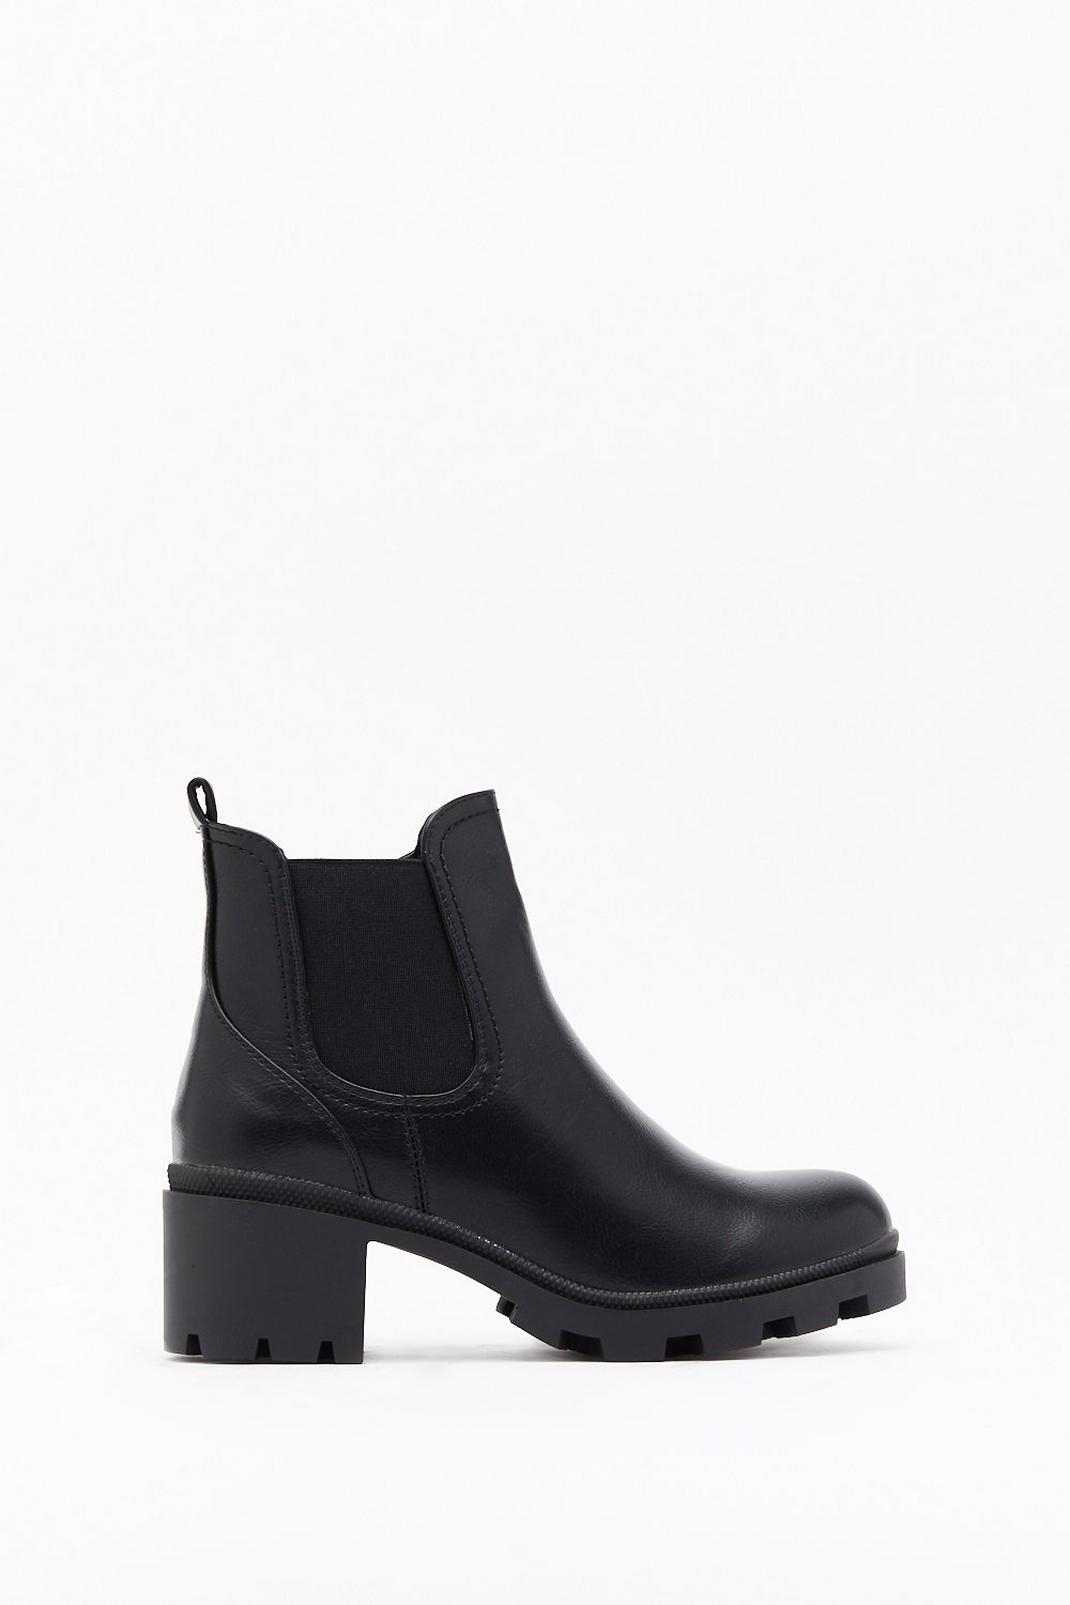 Meet Me at the Bar Faux Leather Ankle Boots | Nasty Gal